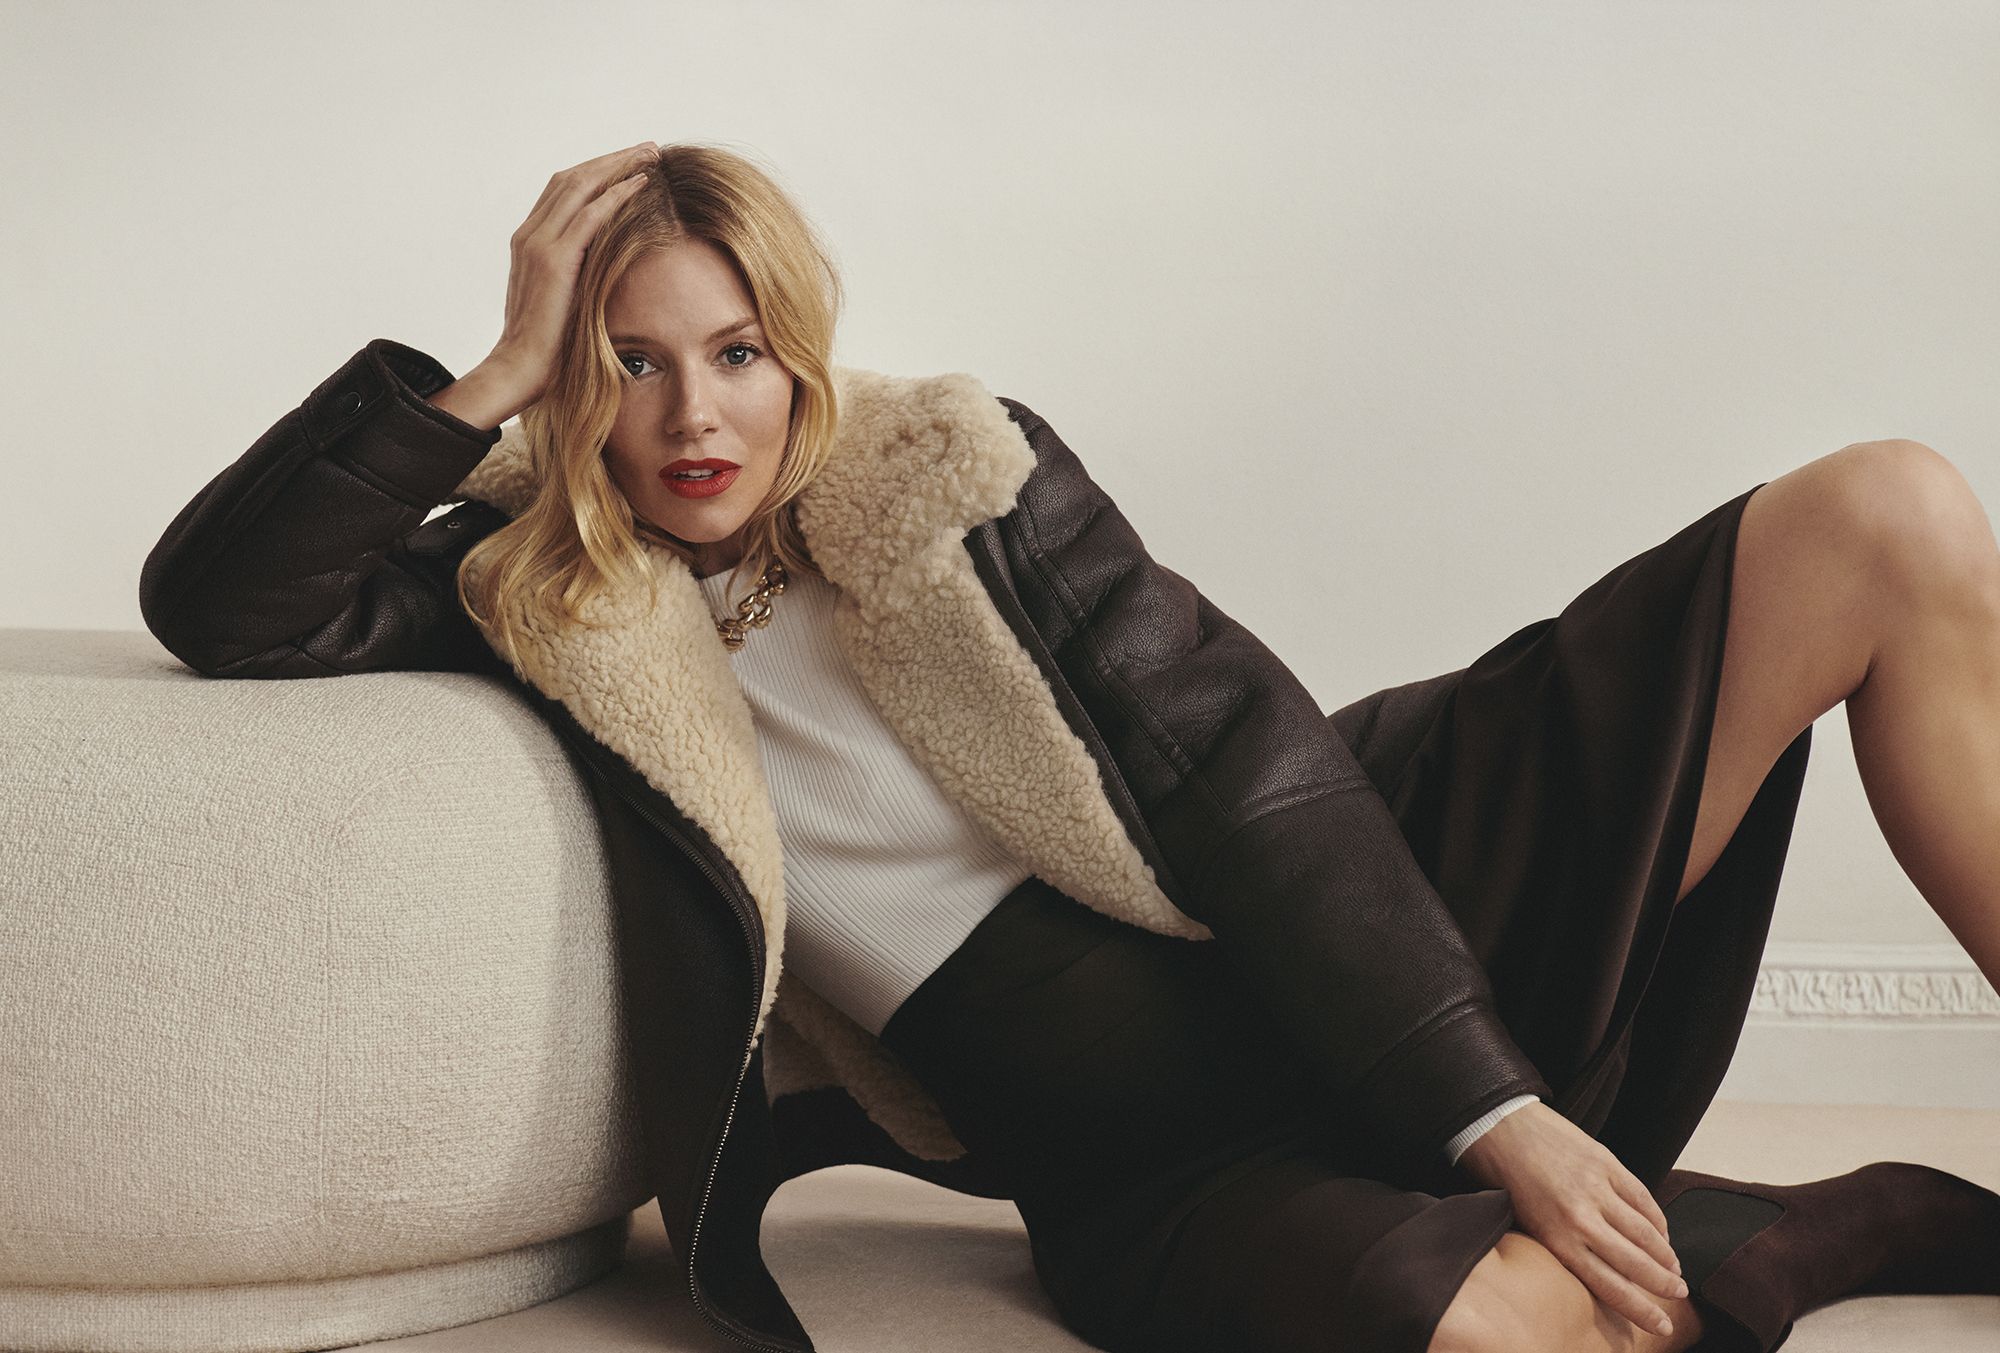 Sienna Miller M&S: Sienna Miller's the new face of Marks & Spencer autumn  fashion